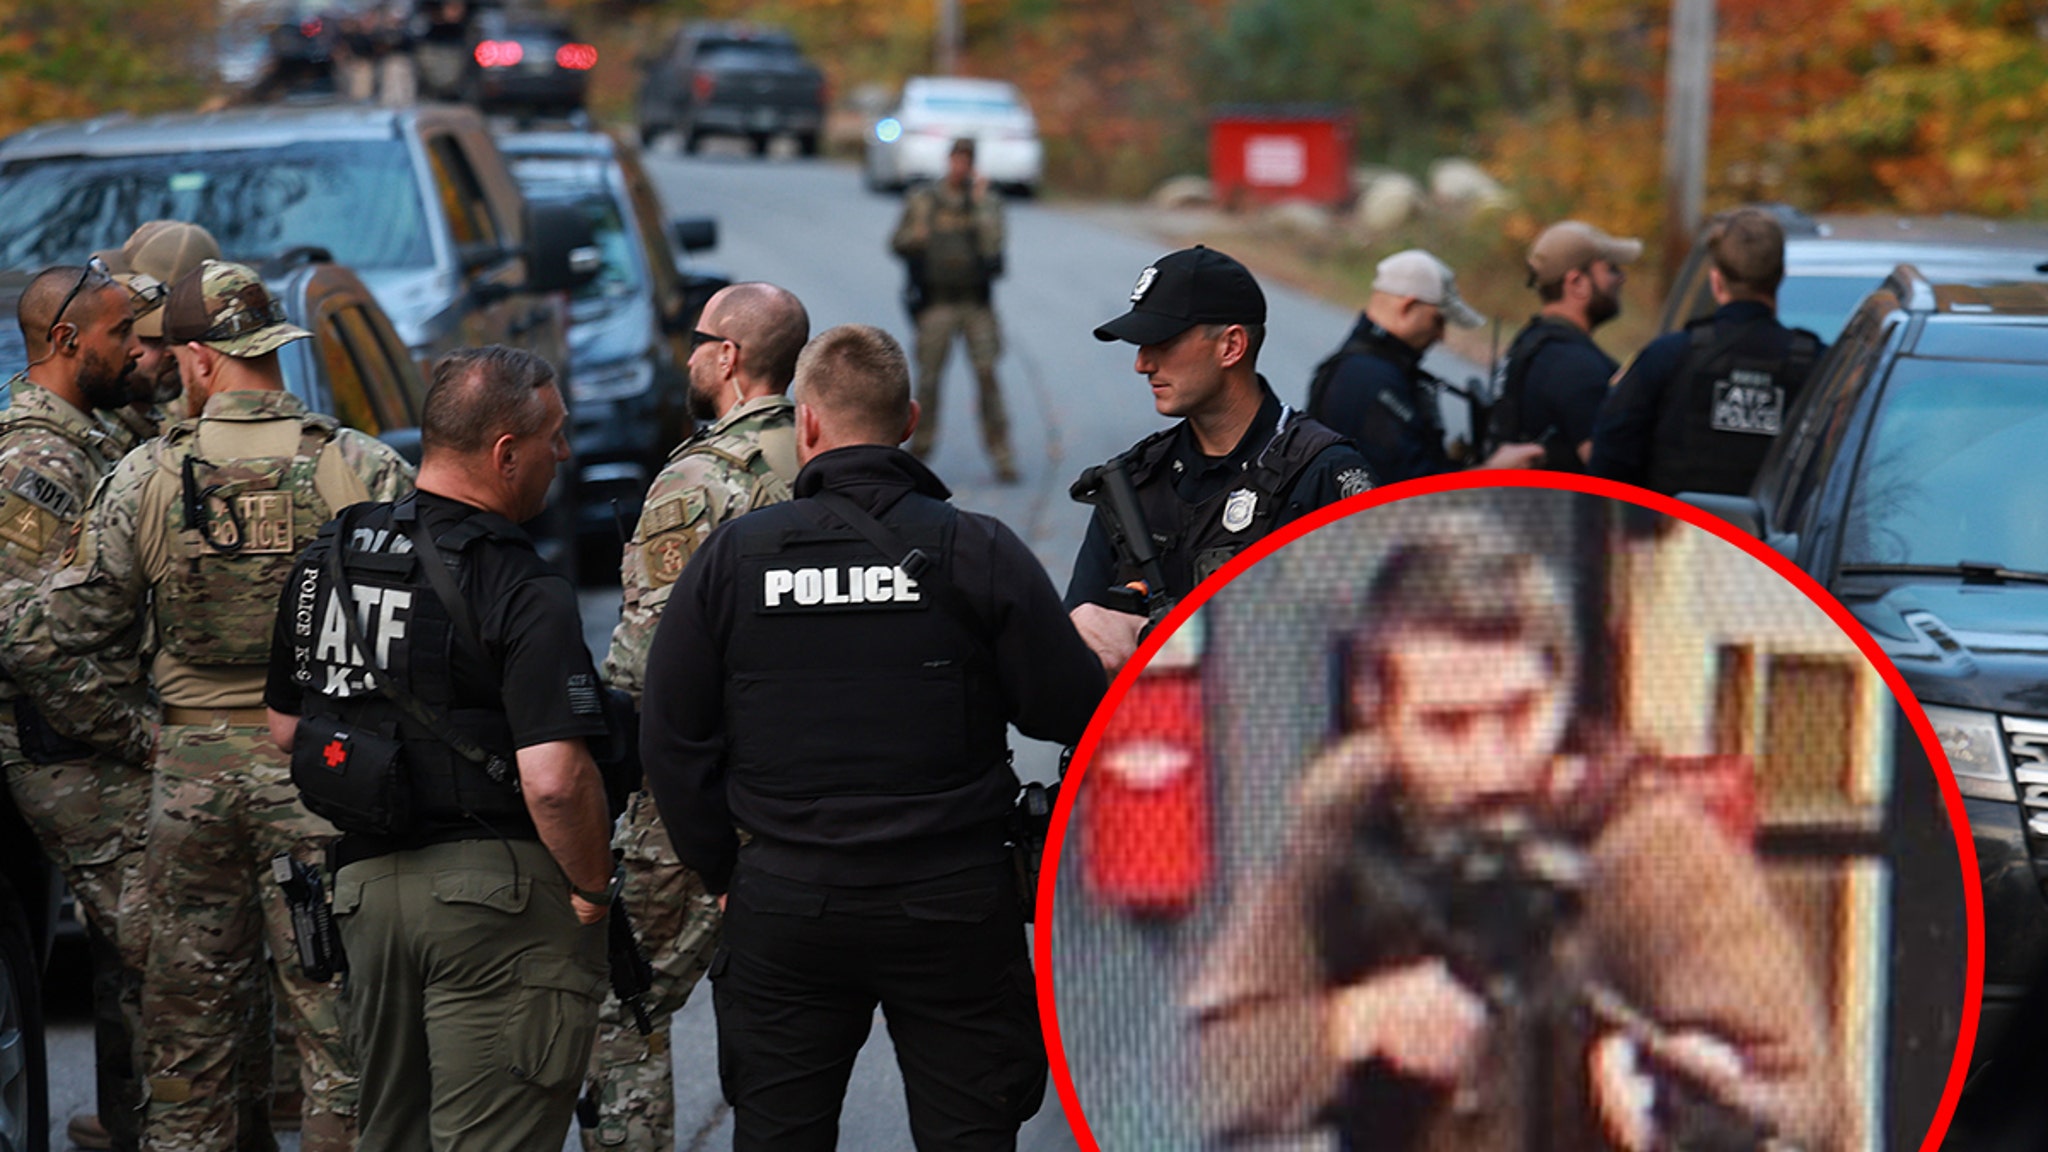 Maine Mass Shooting Suspect Robert Card’s Home Surrounded by Police